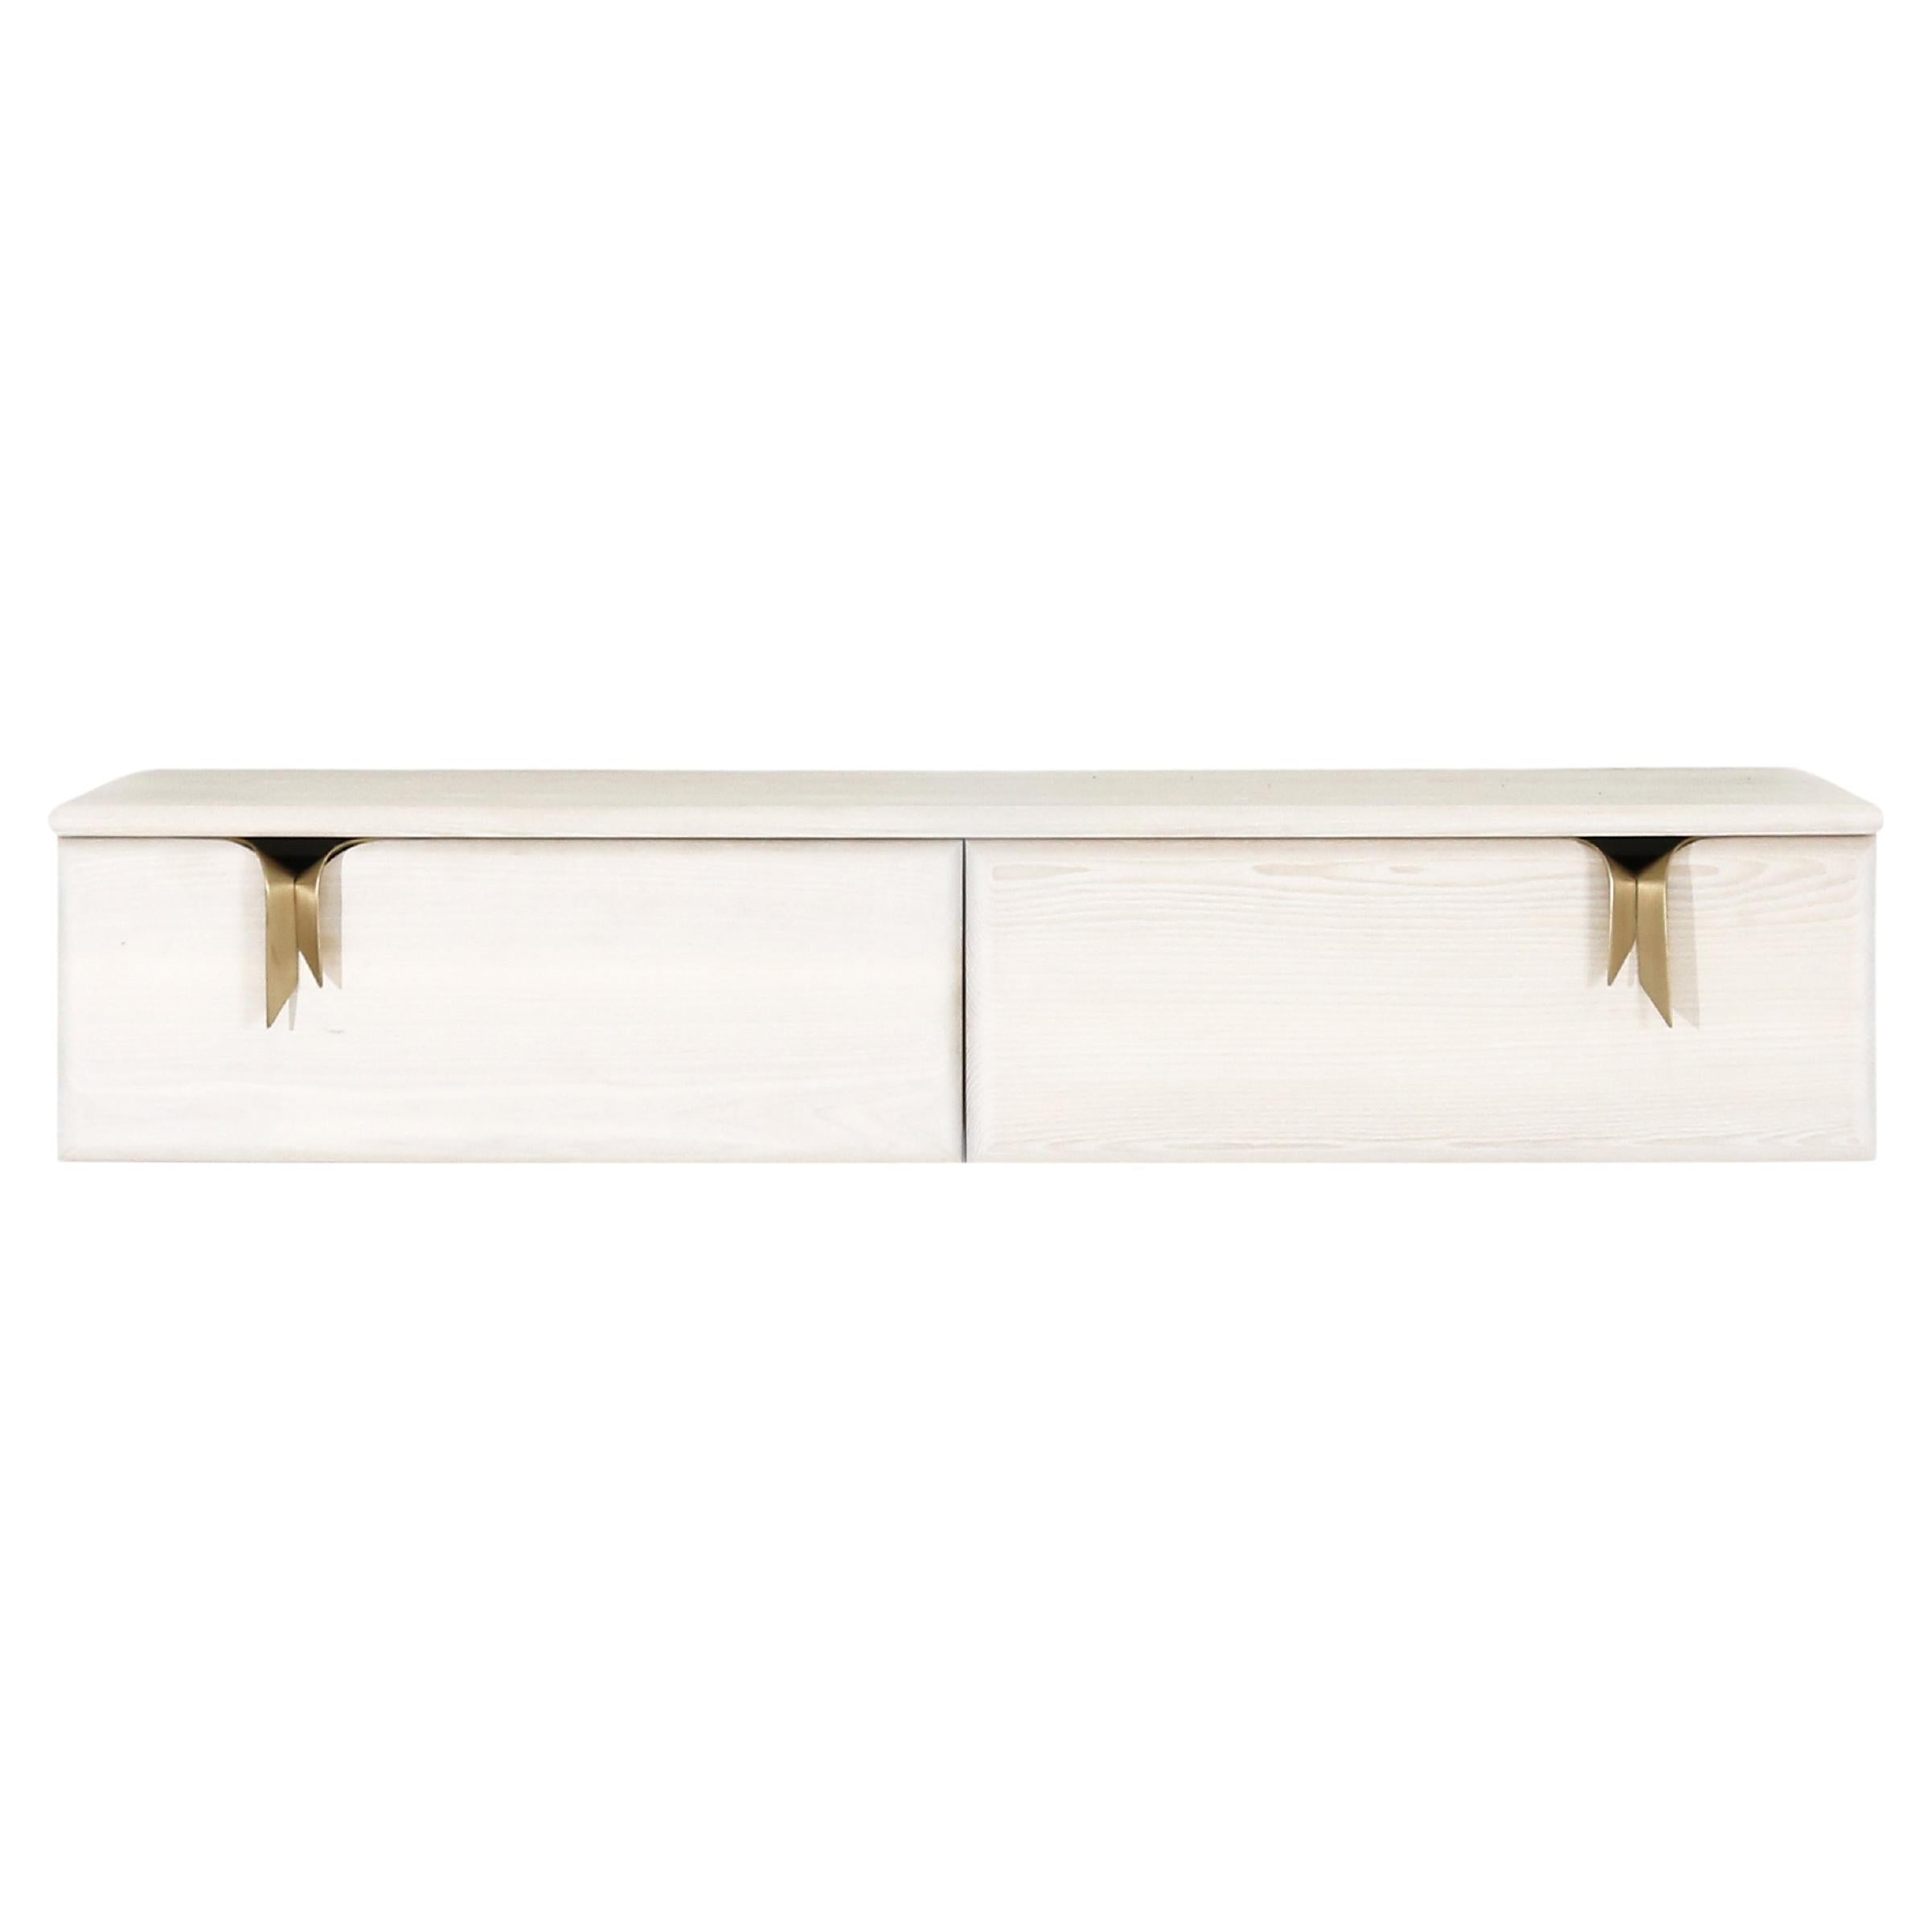 Ribbon Wall Mounted Console, Ivory Wood, Bronze Hardware by Debra Folz For Sale